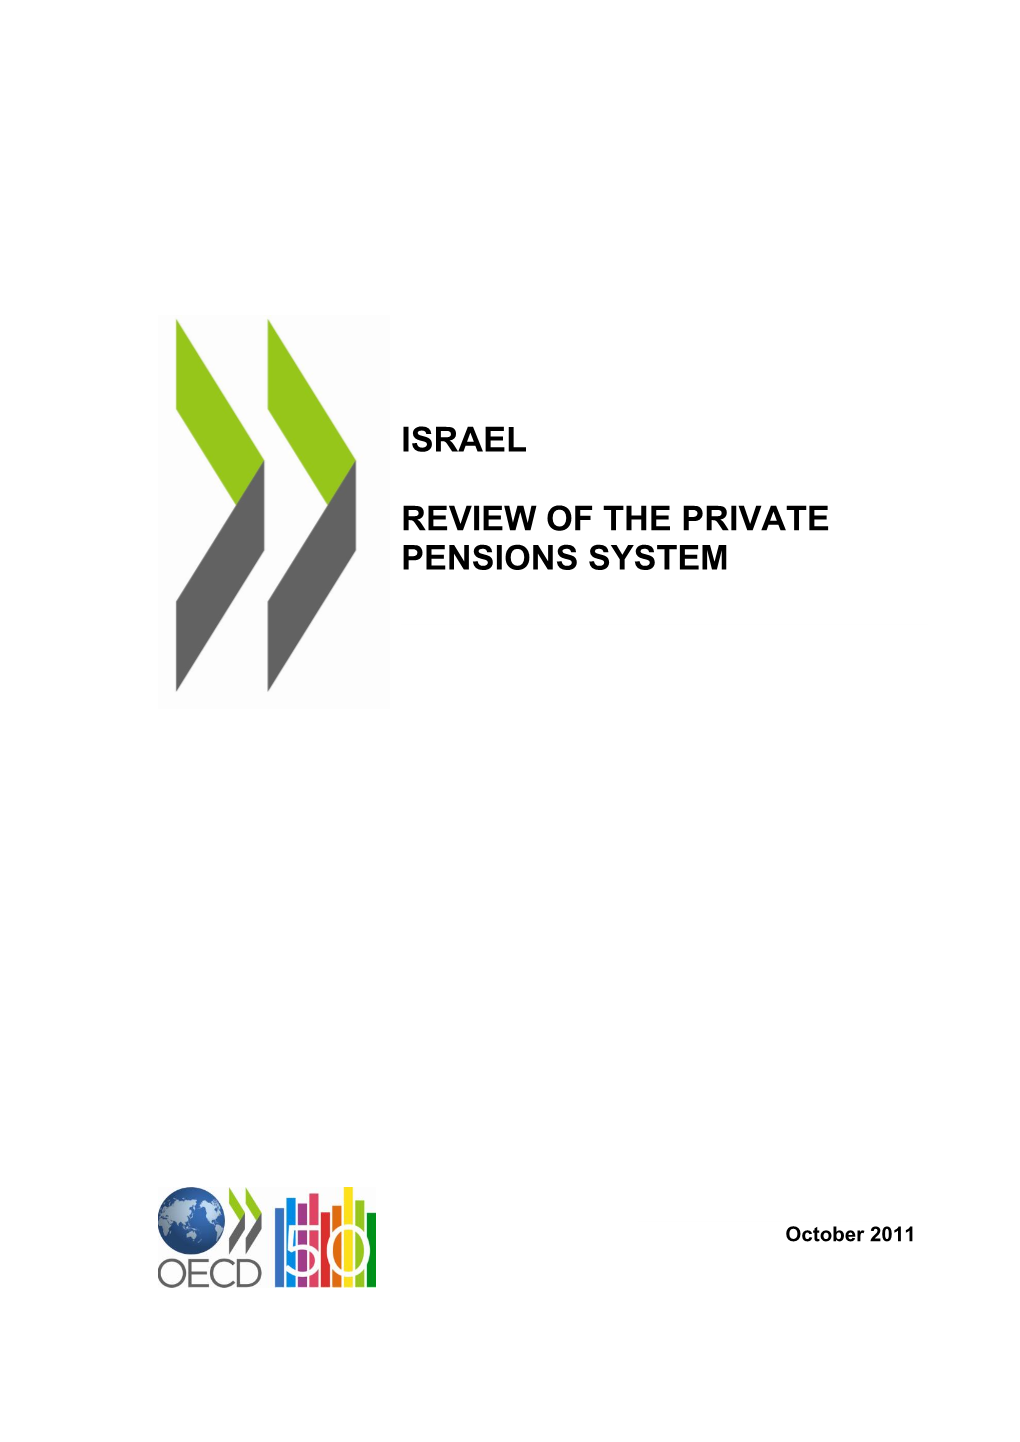 Israel Review of the Private Pensions System